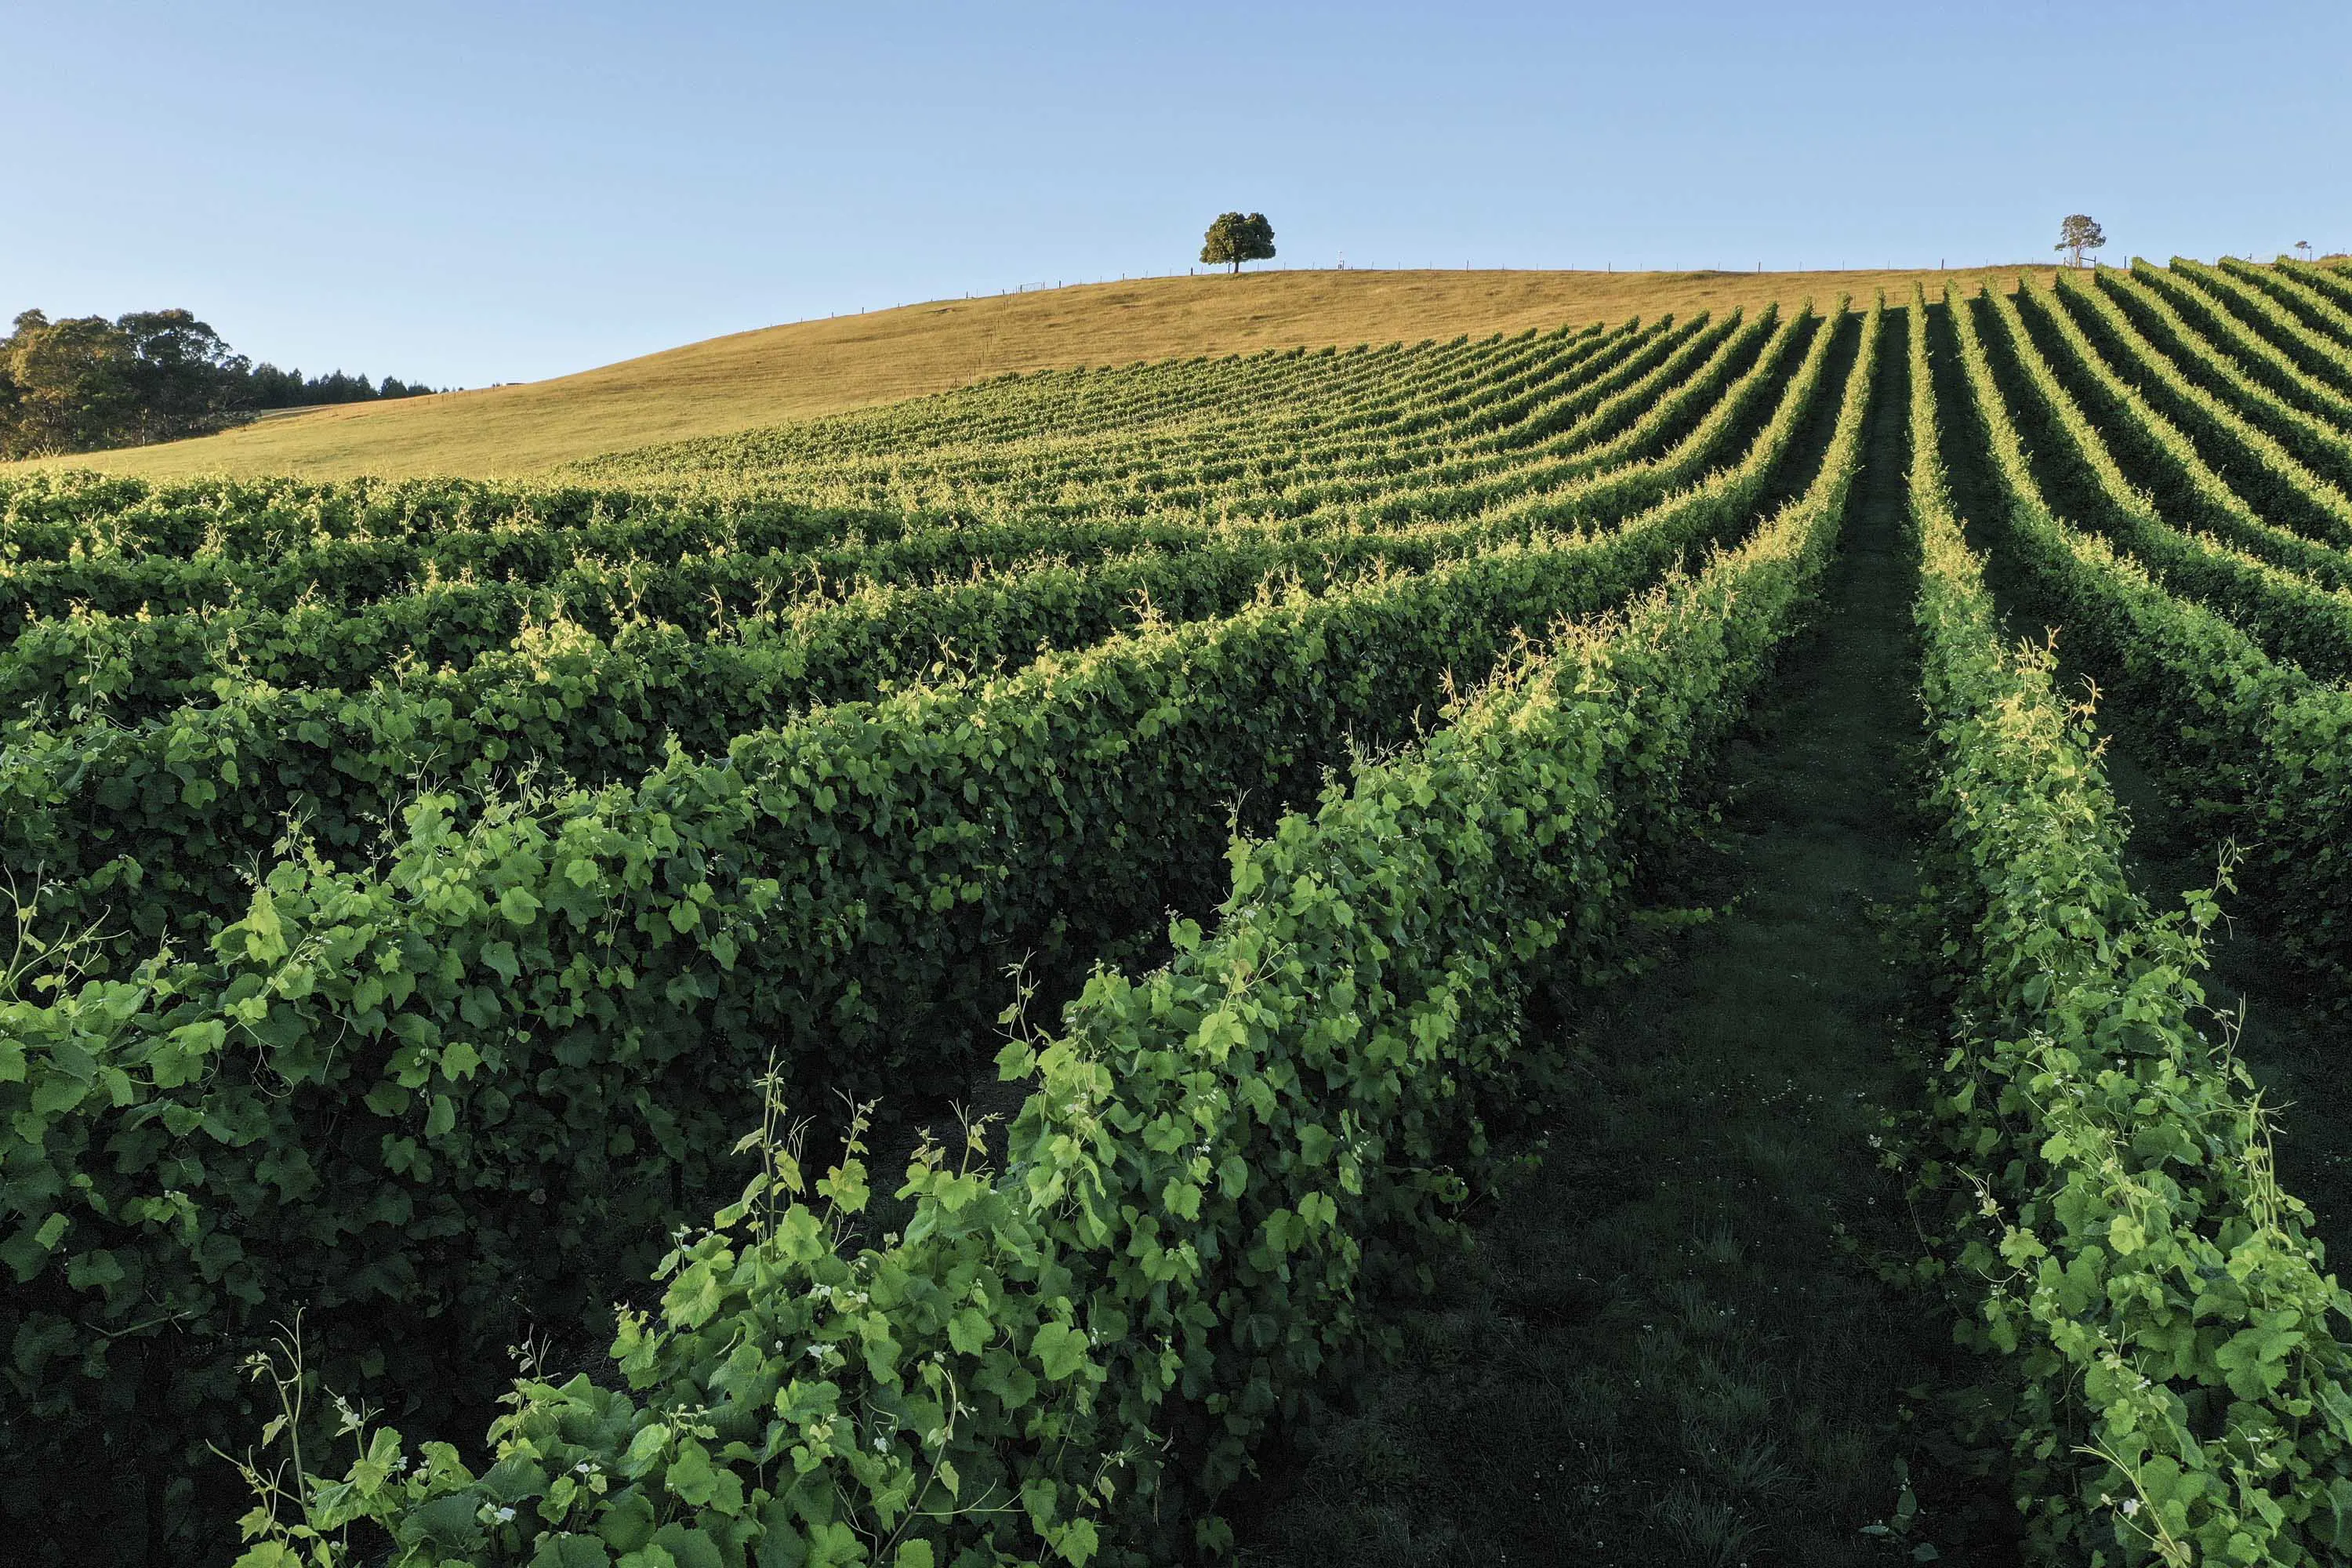 A large sloping field with multiple rows of leafy green grape vines. 